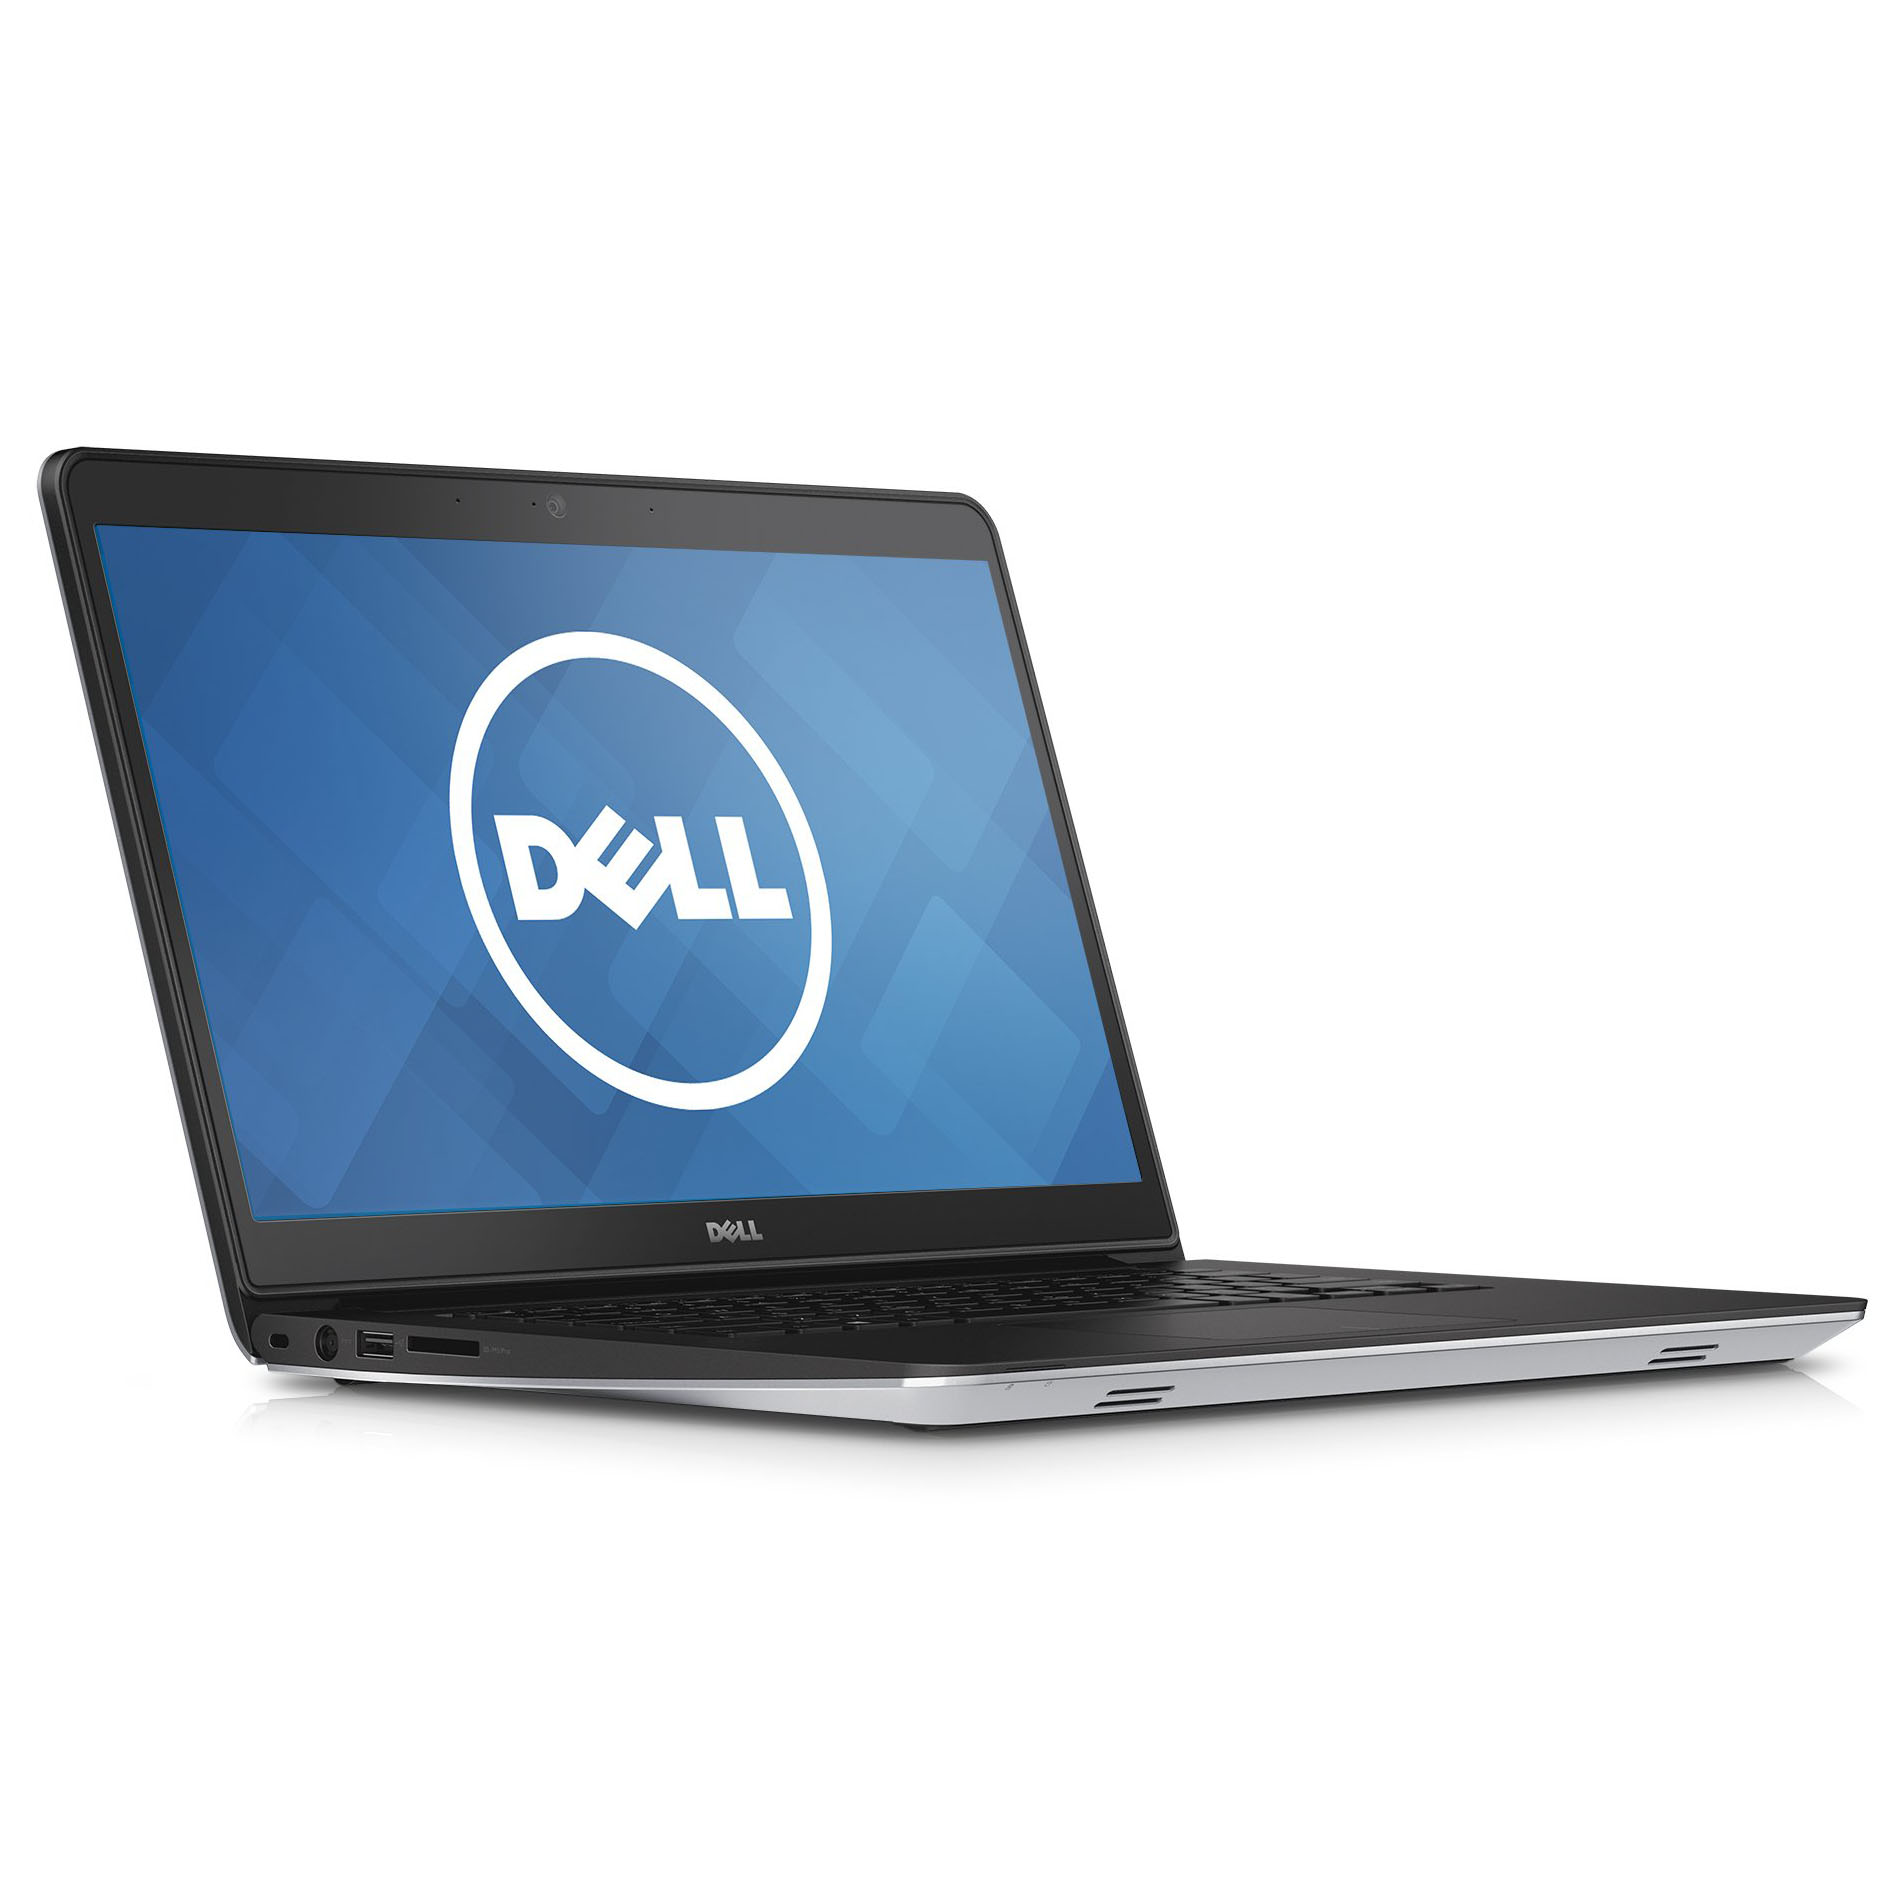 Dell Inspiron 14 5455 Notebook